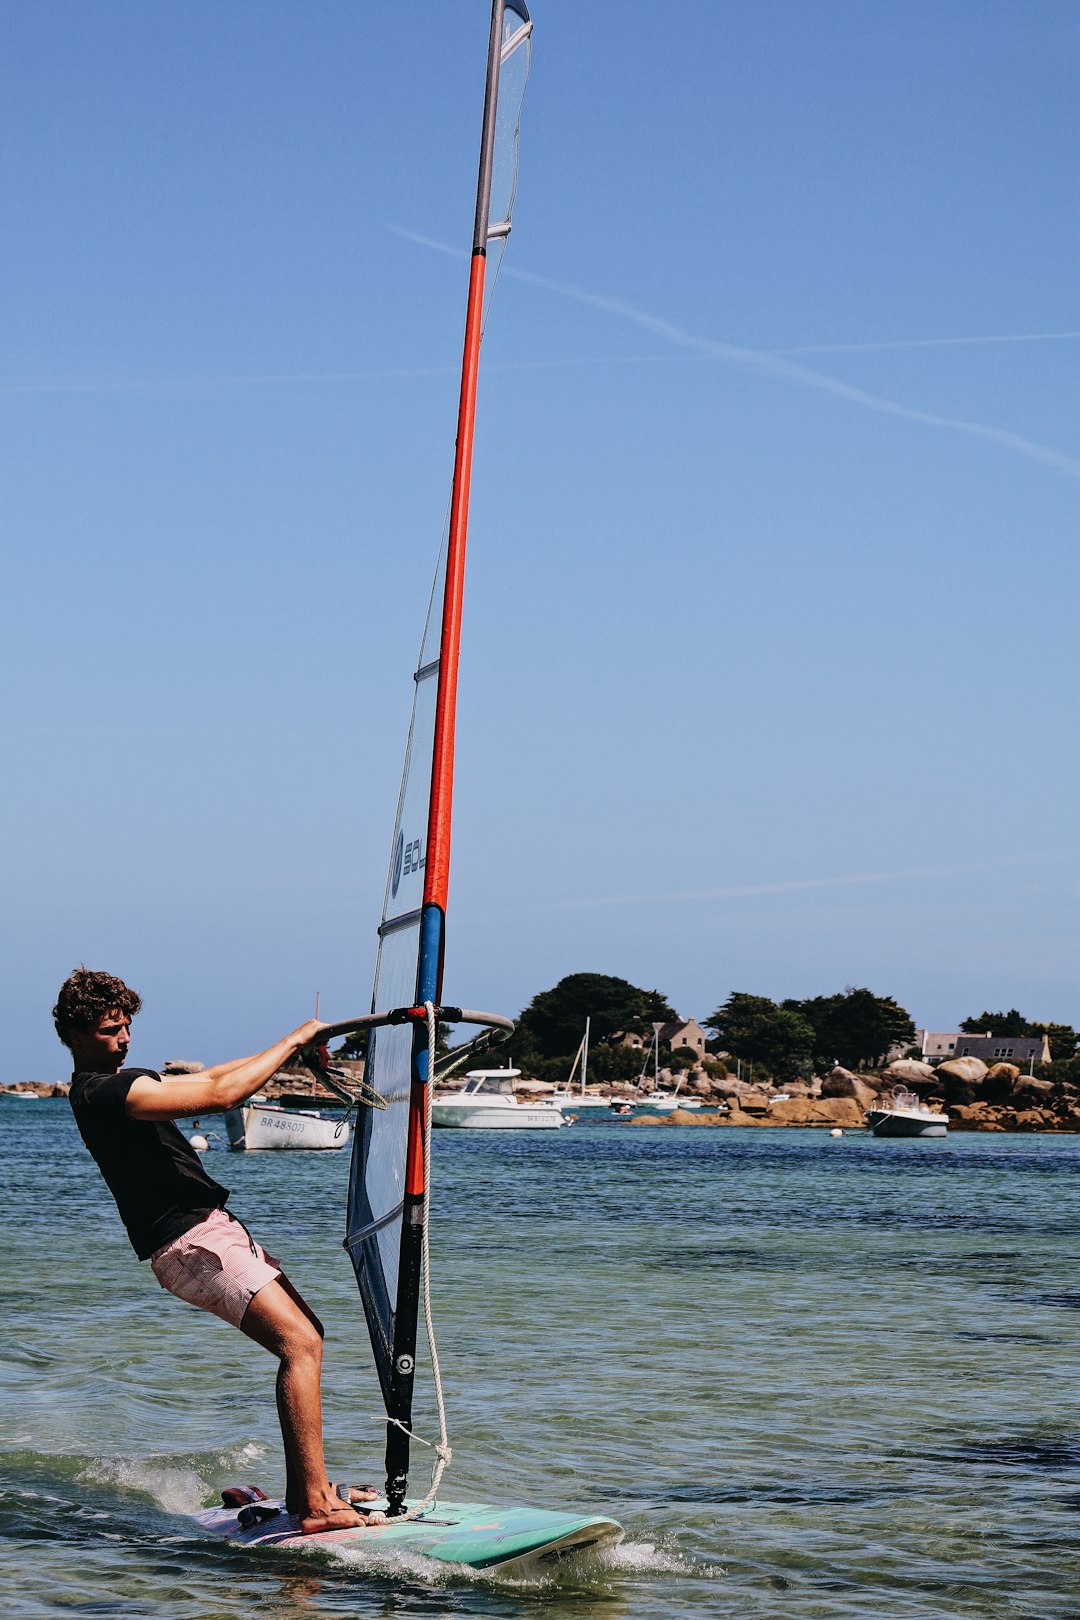 Travel Tips and Stories of Brignogan-Plage in France